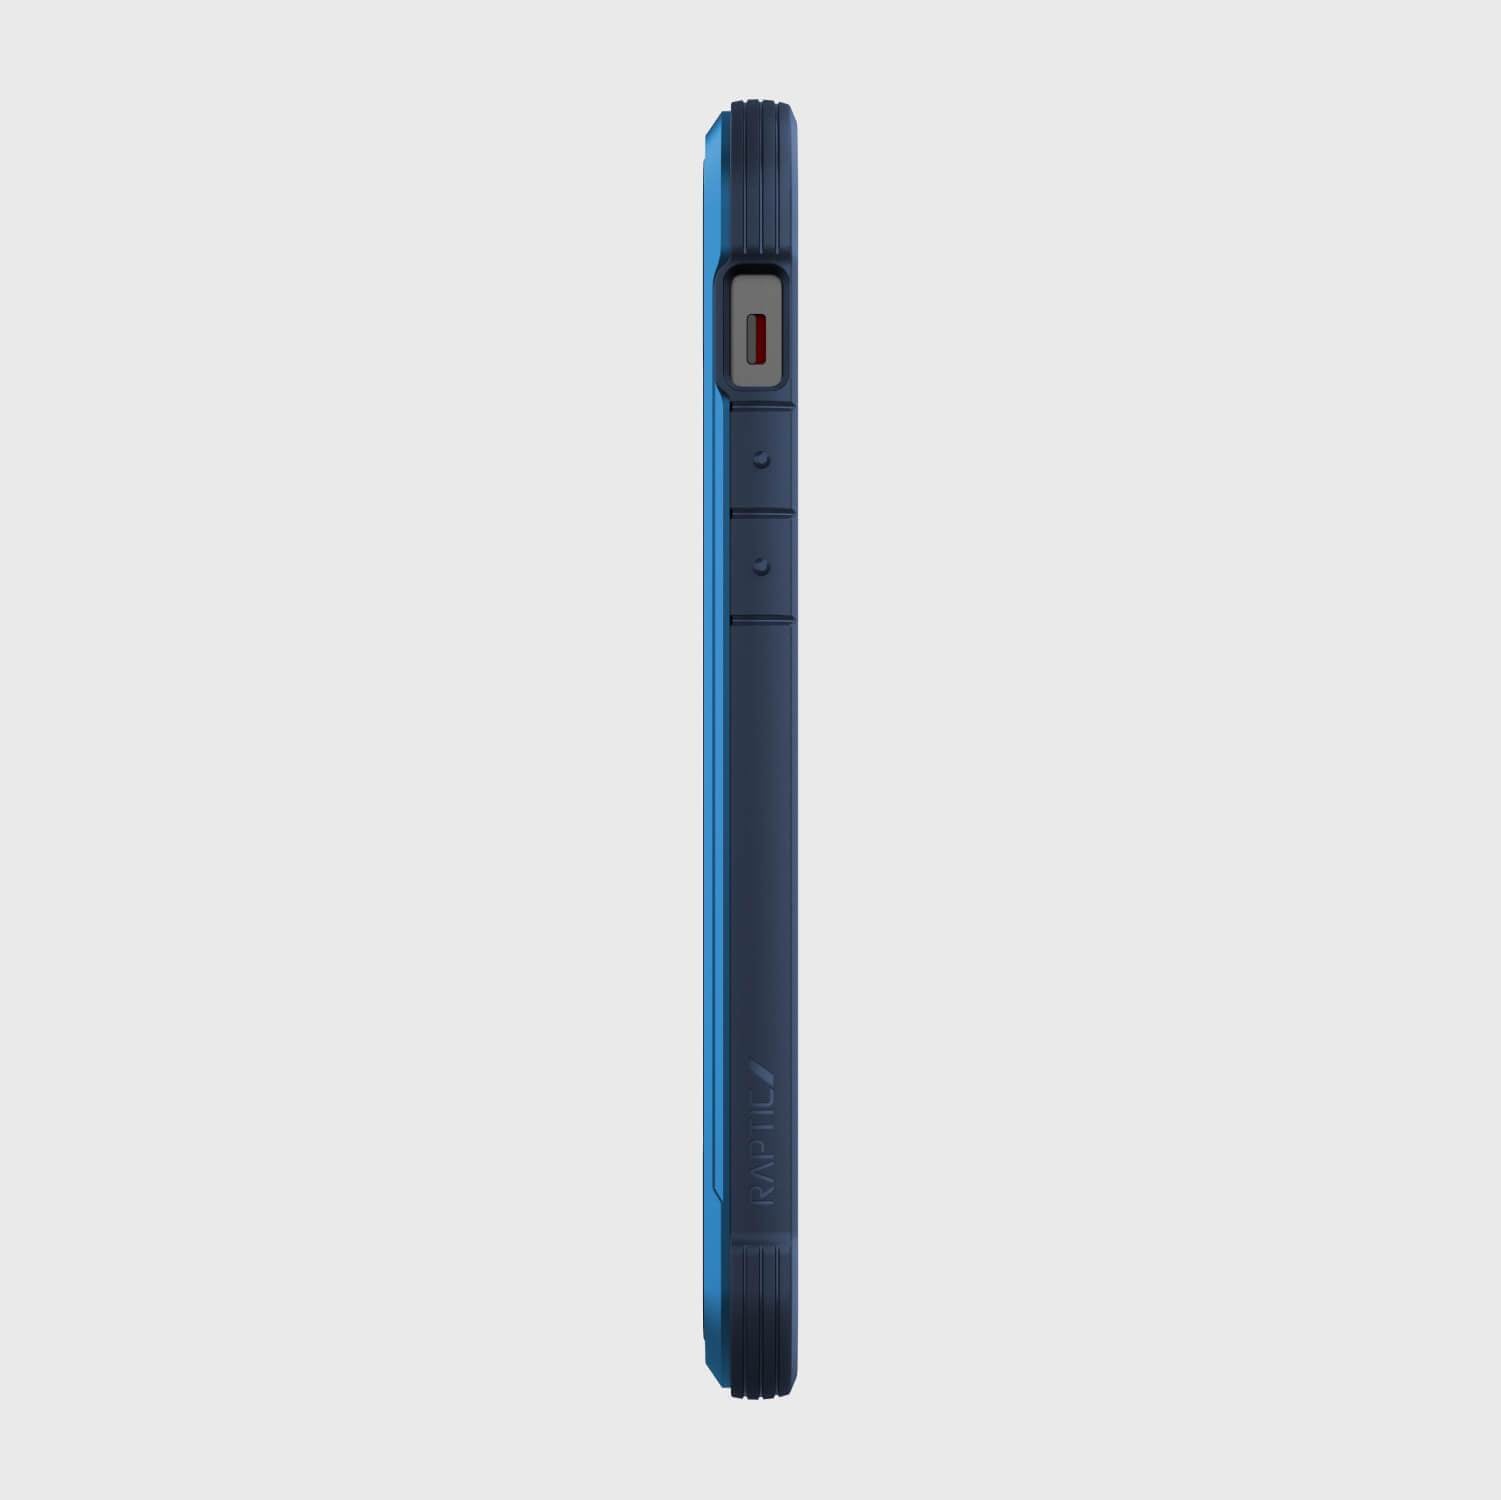 The back view of a blue Raptic iPhone 12 Pro Max case.